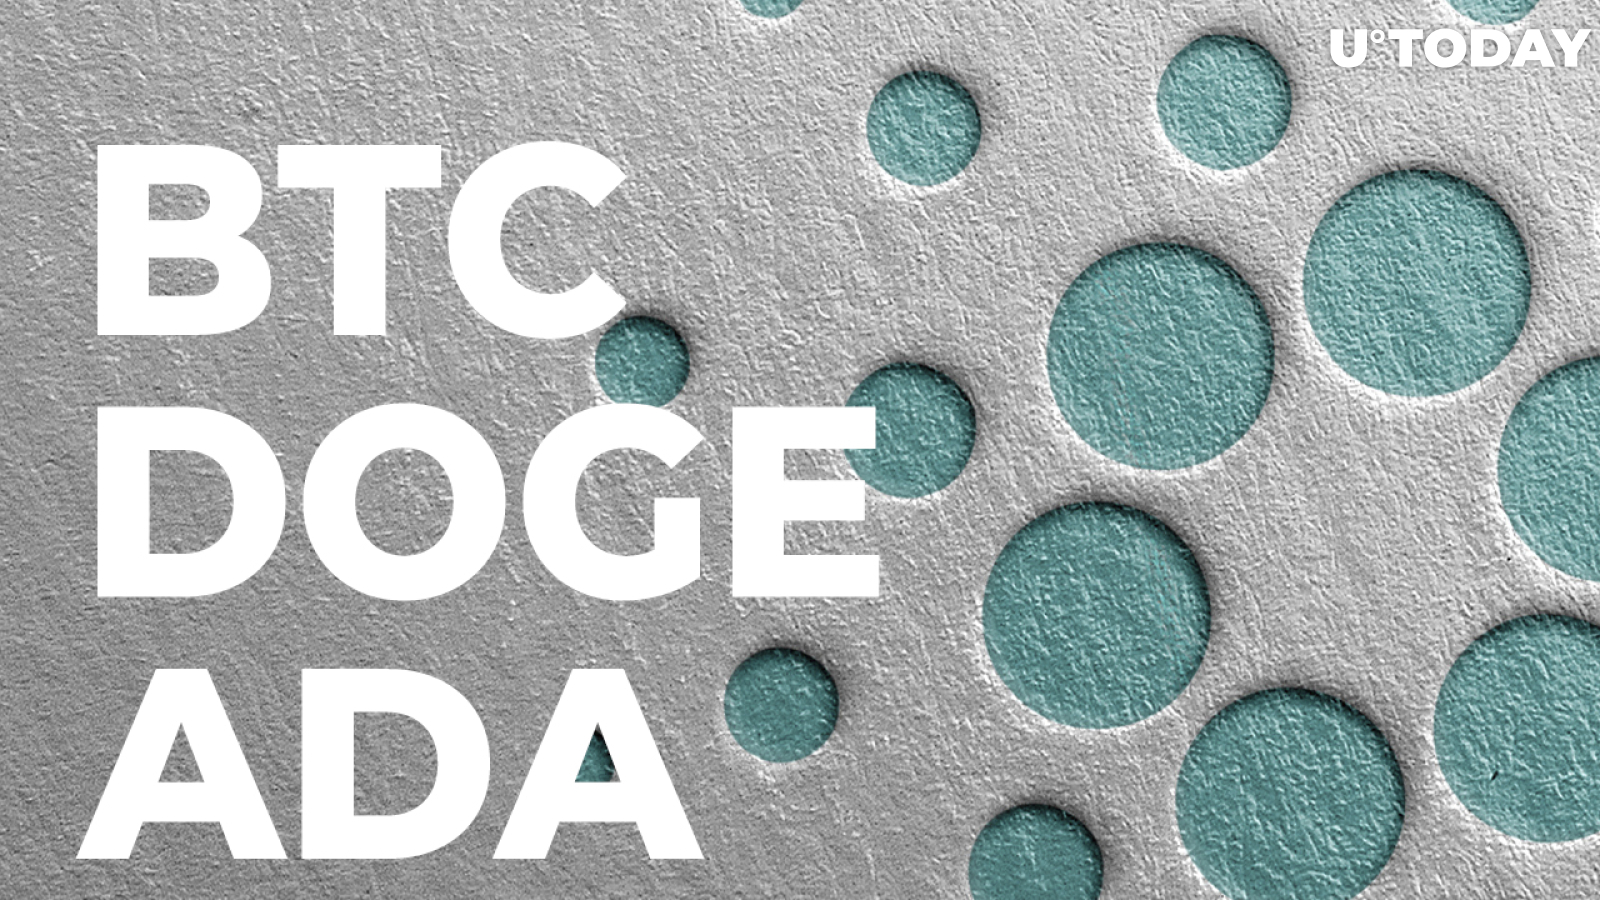 Cardano Founder Aims to Create Network Cross Chain for BTC, DOGE and ADA